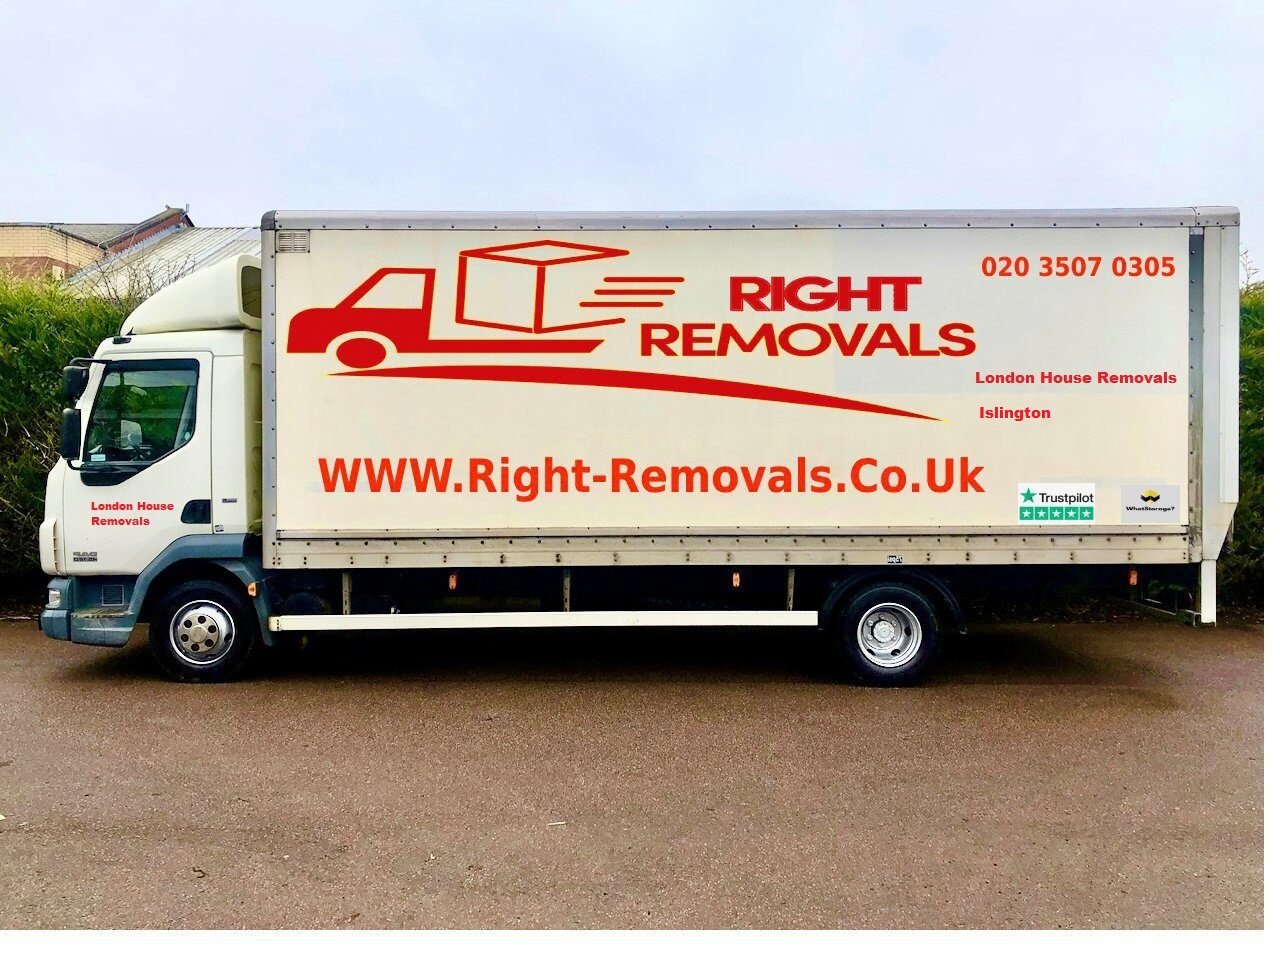 Get Expert Islington, London House Removal & Sizeable Van Fleets At This Company